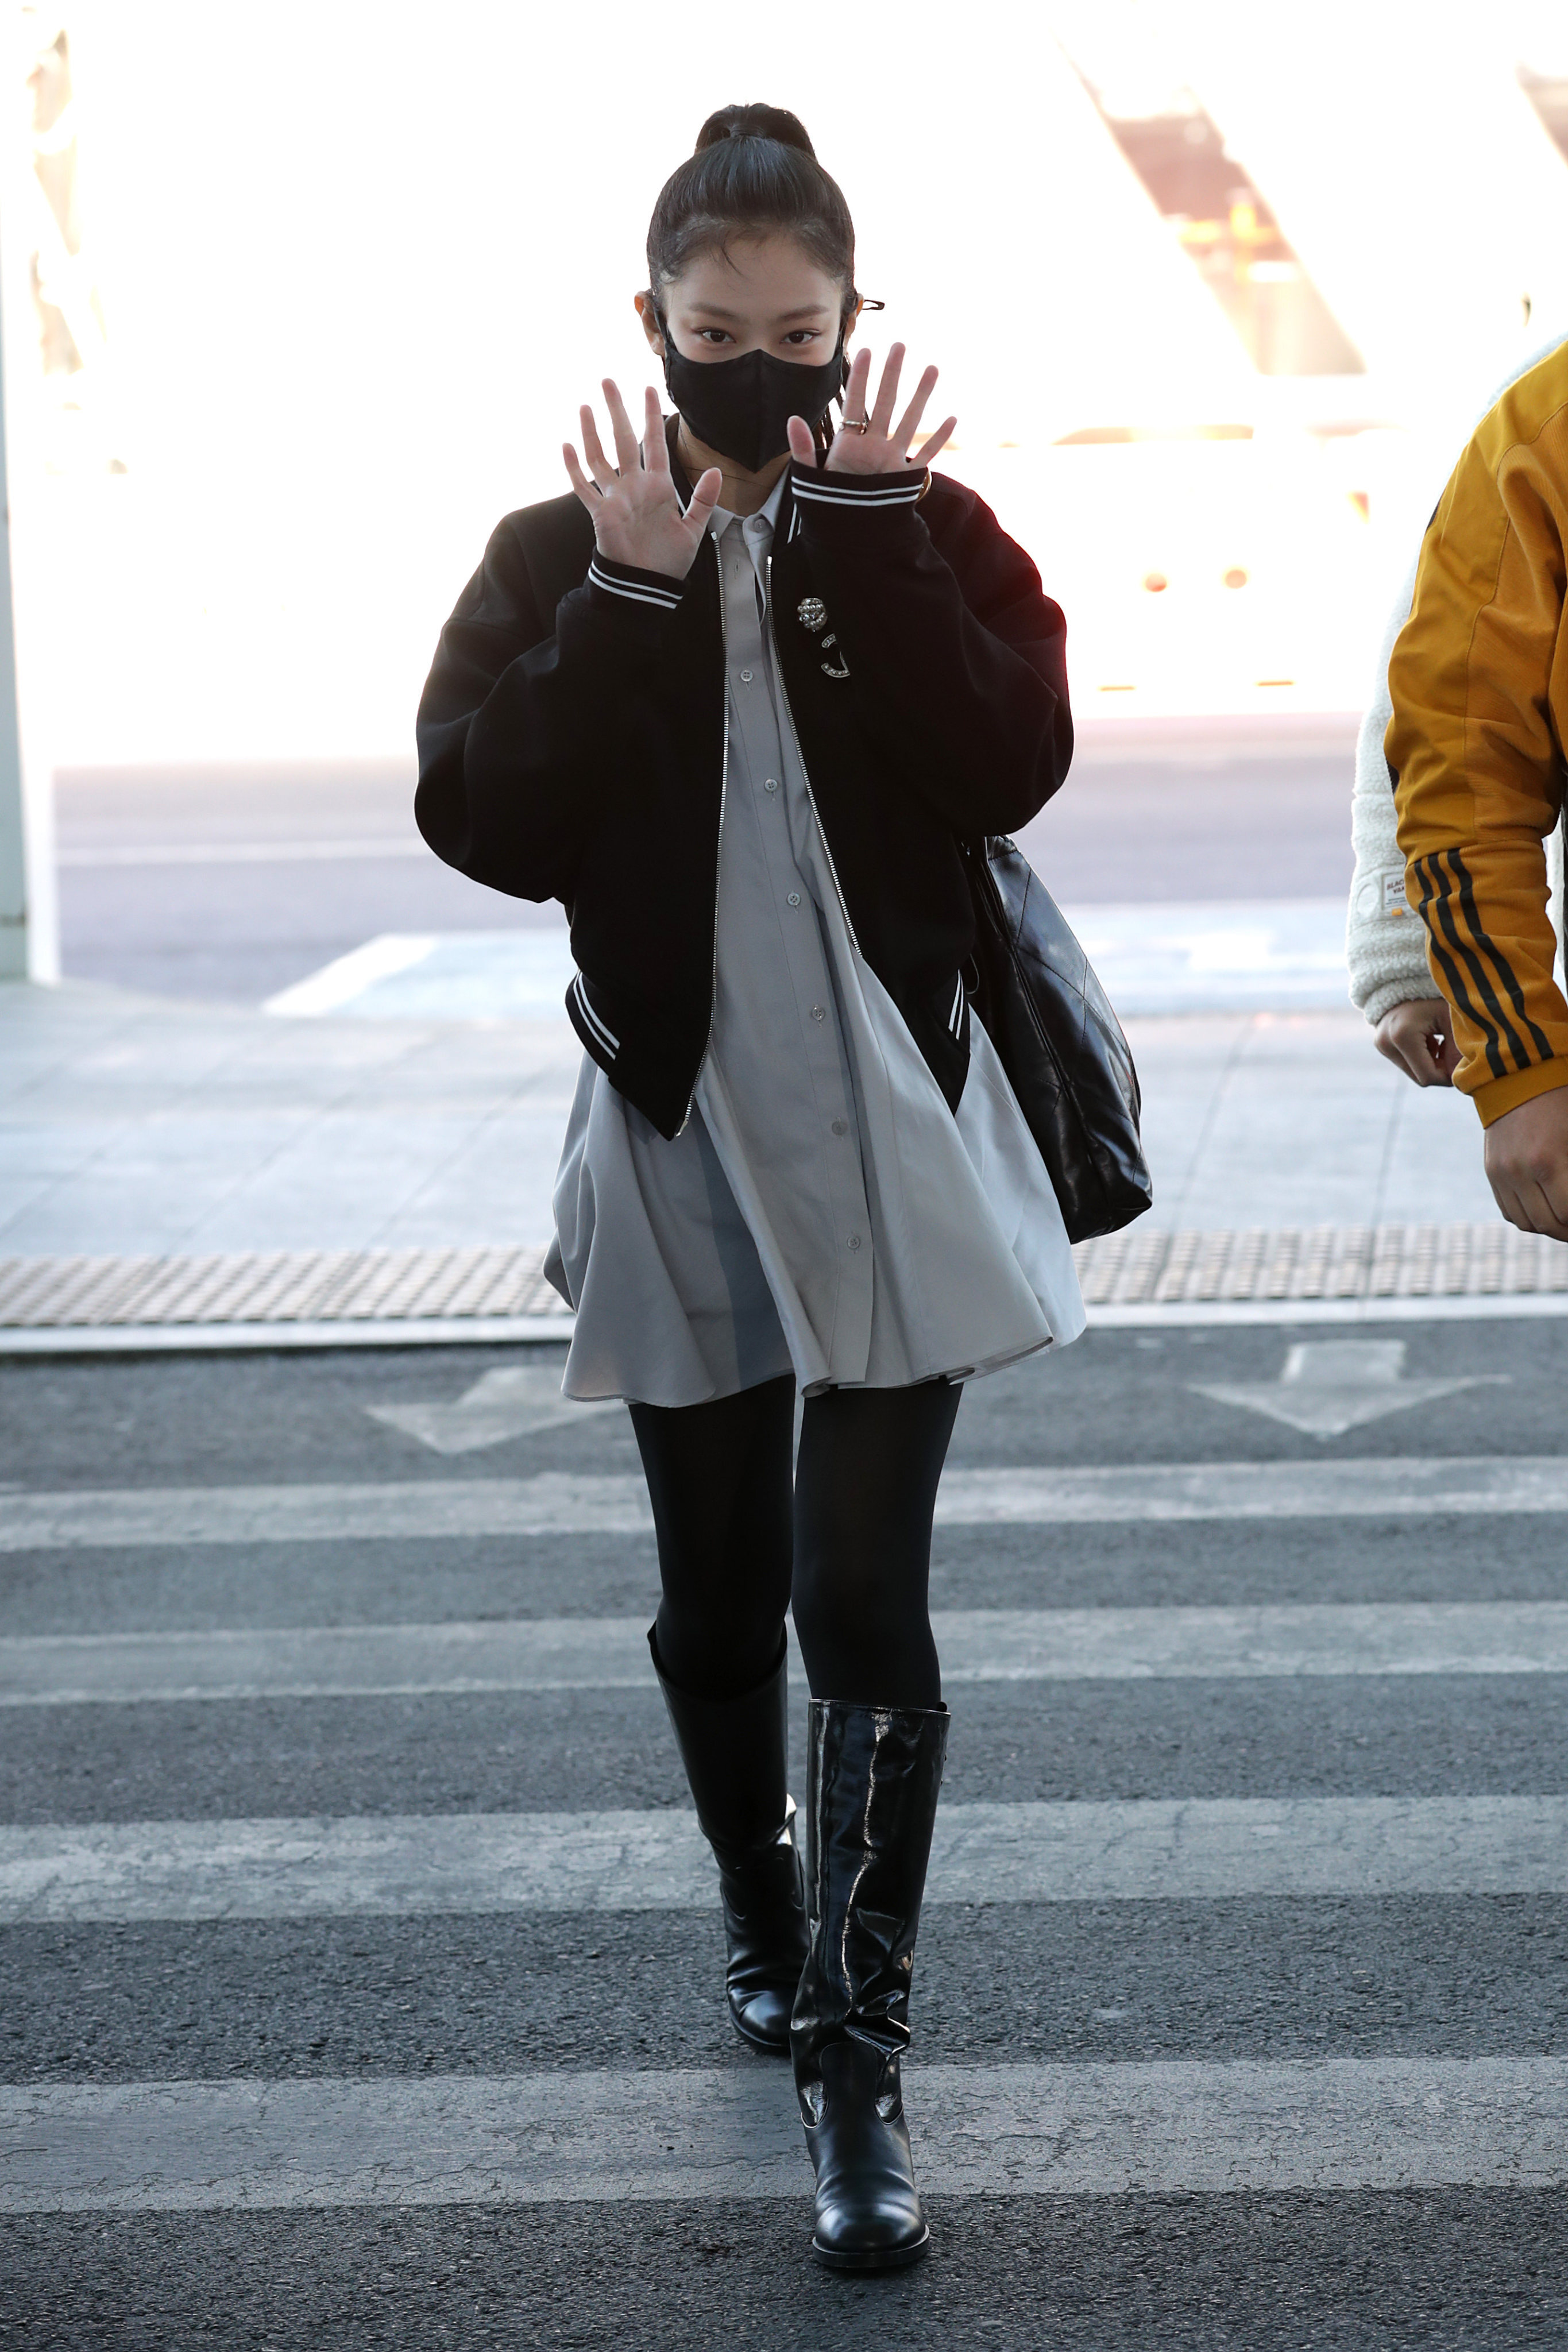 Pre-Covid-19, face masks were worn by celebrities like Jennie of Blackpink (pictured) to hide their faces. Post-Covid, many South Koreans will continue wearing them, and for a variety of reasons. Photo: GC Images